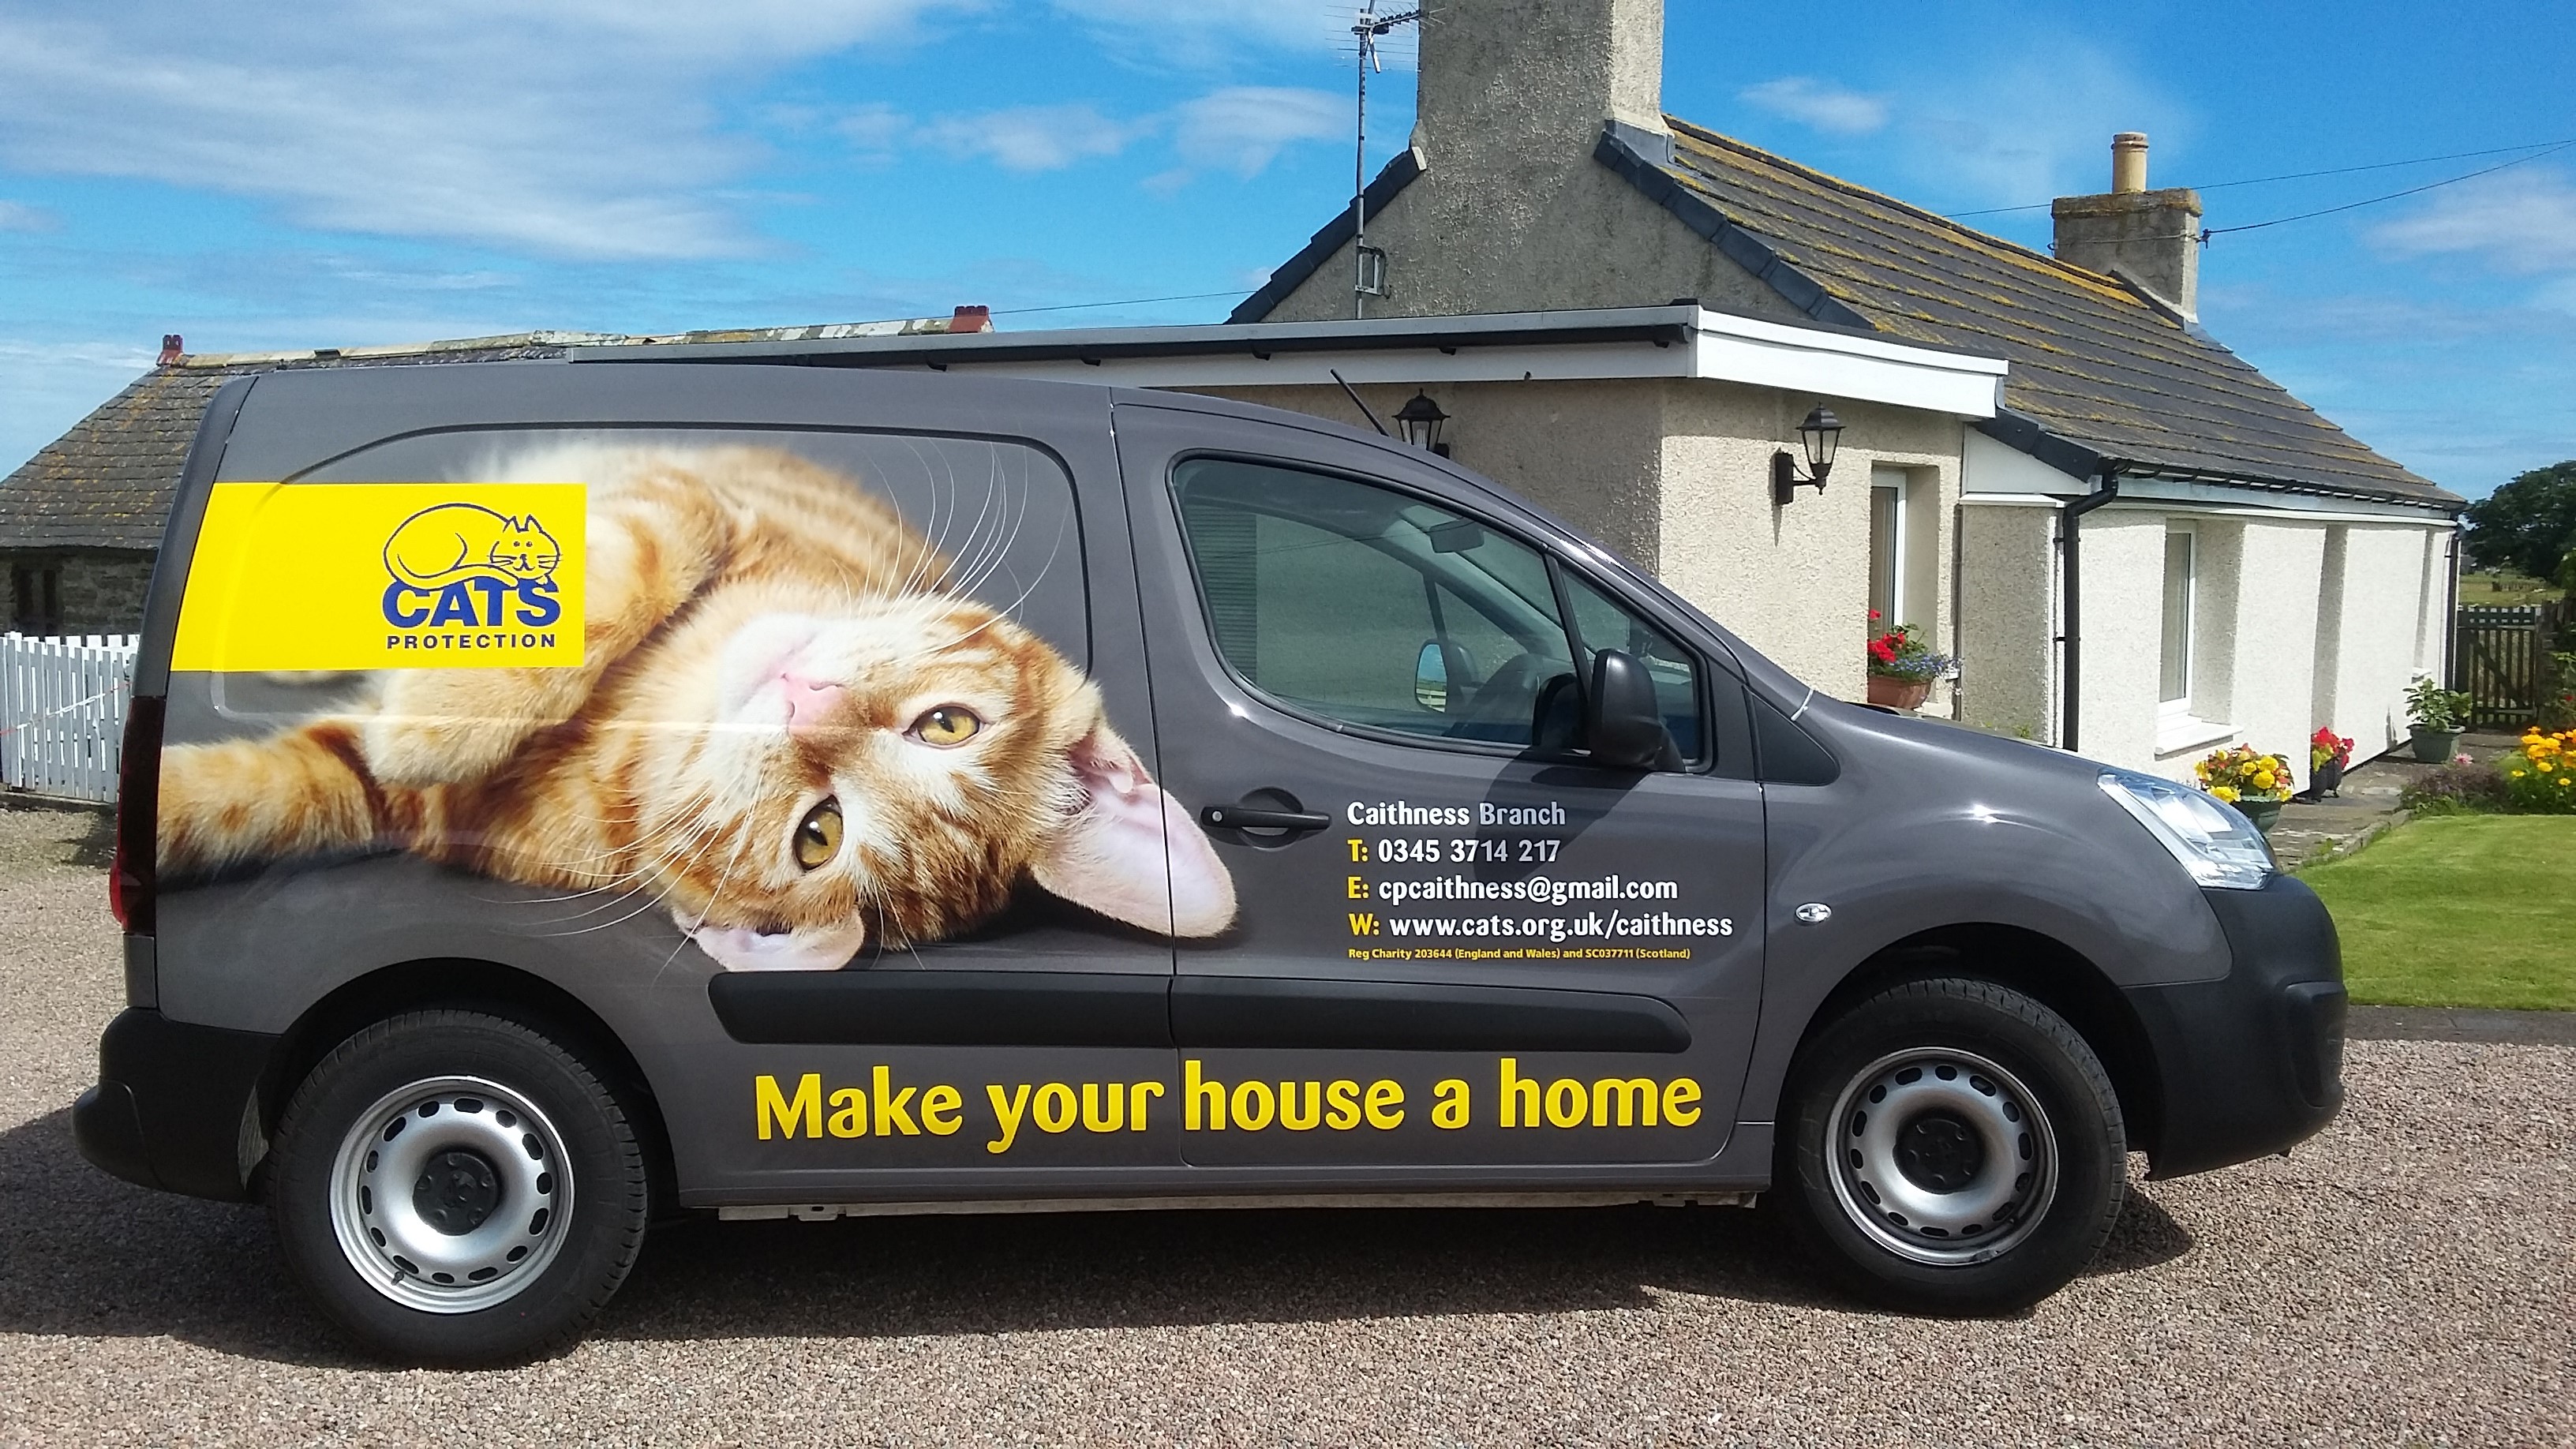 Welcome to Cats Caithness